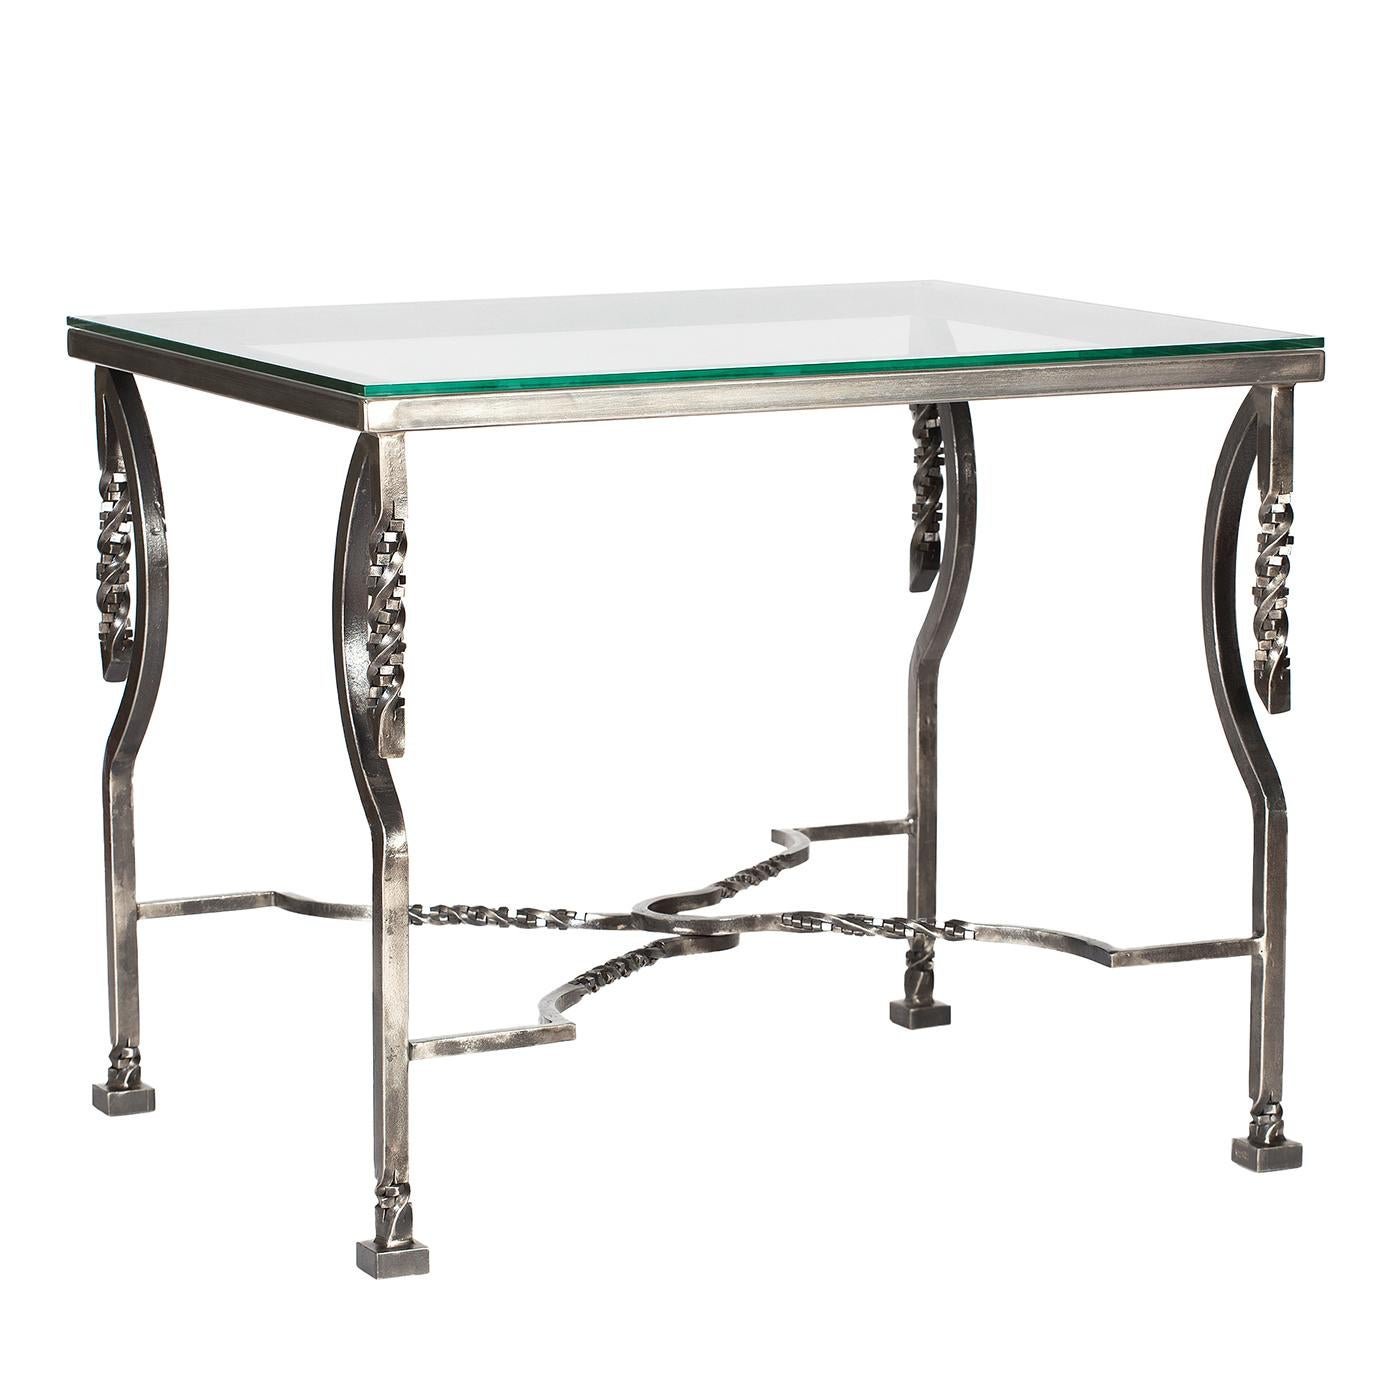 Twist Dining Table For Sale